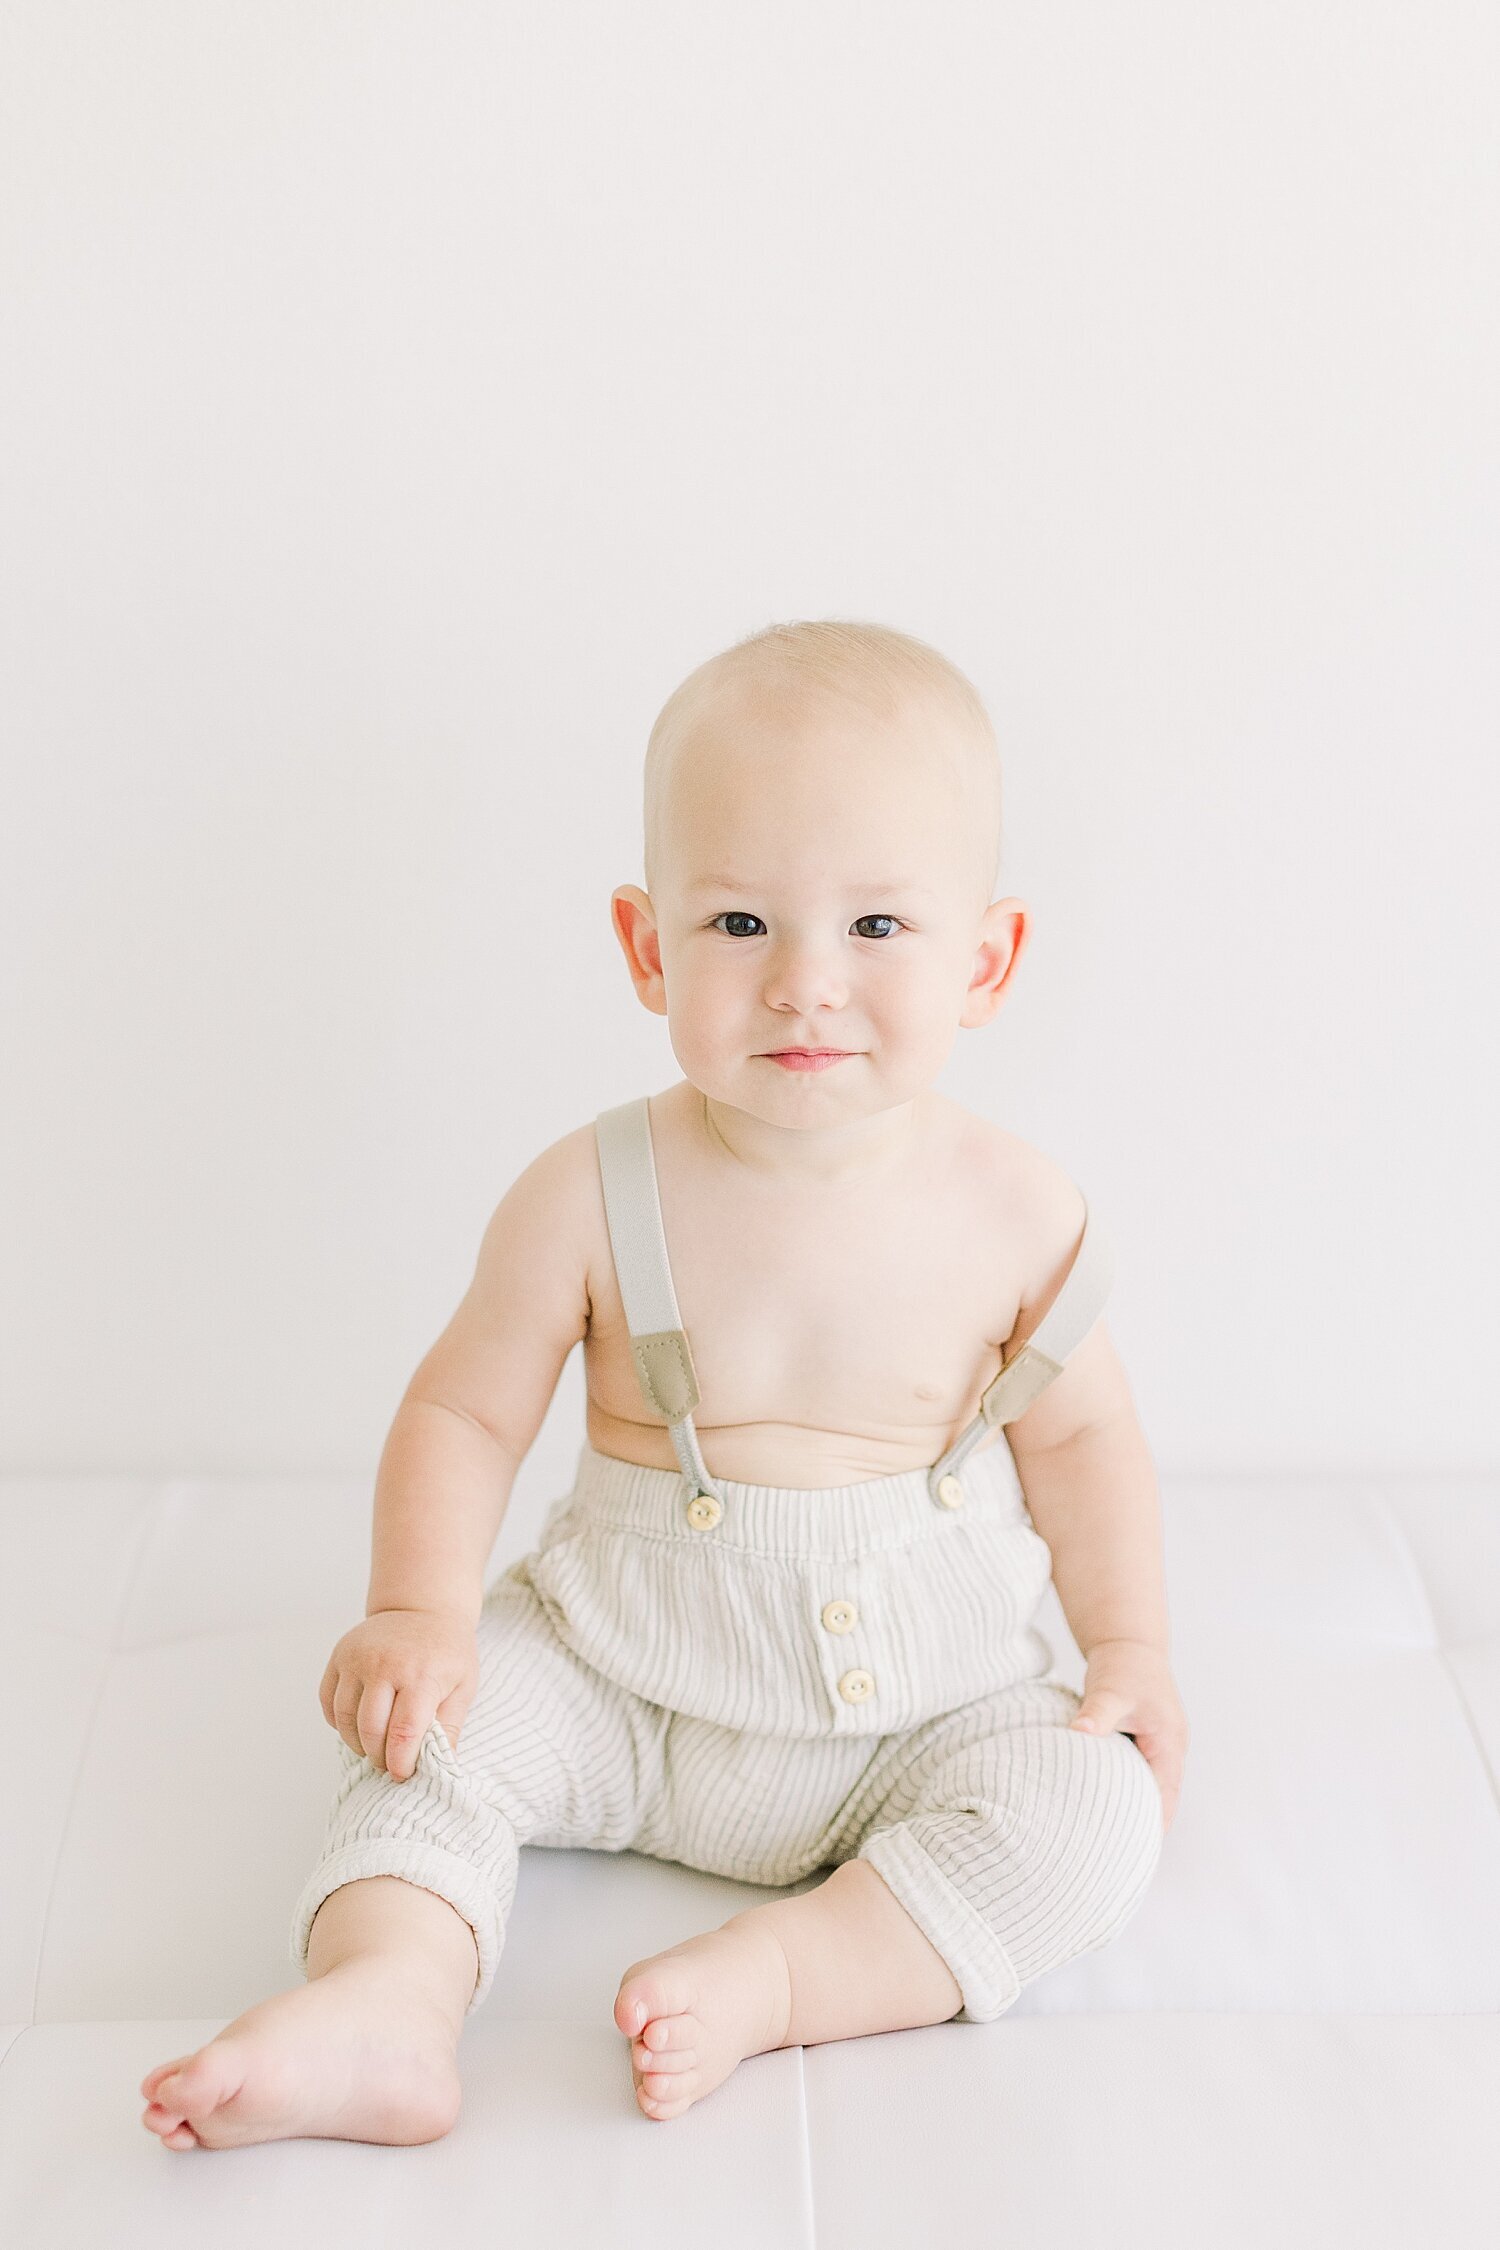 One year old sitting up, wearing suspenders for his first birthday photoshoot with Ambre Williams Photography.